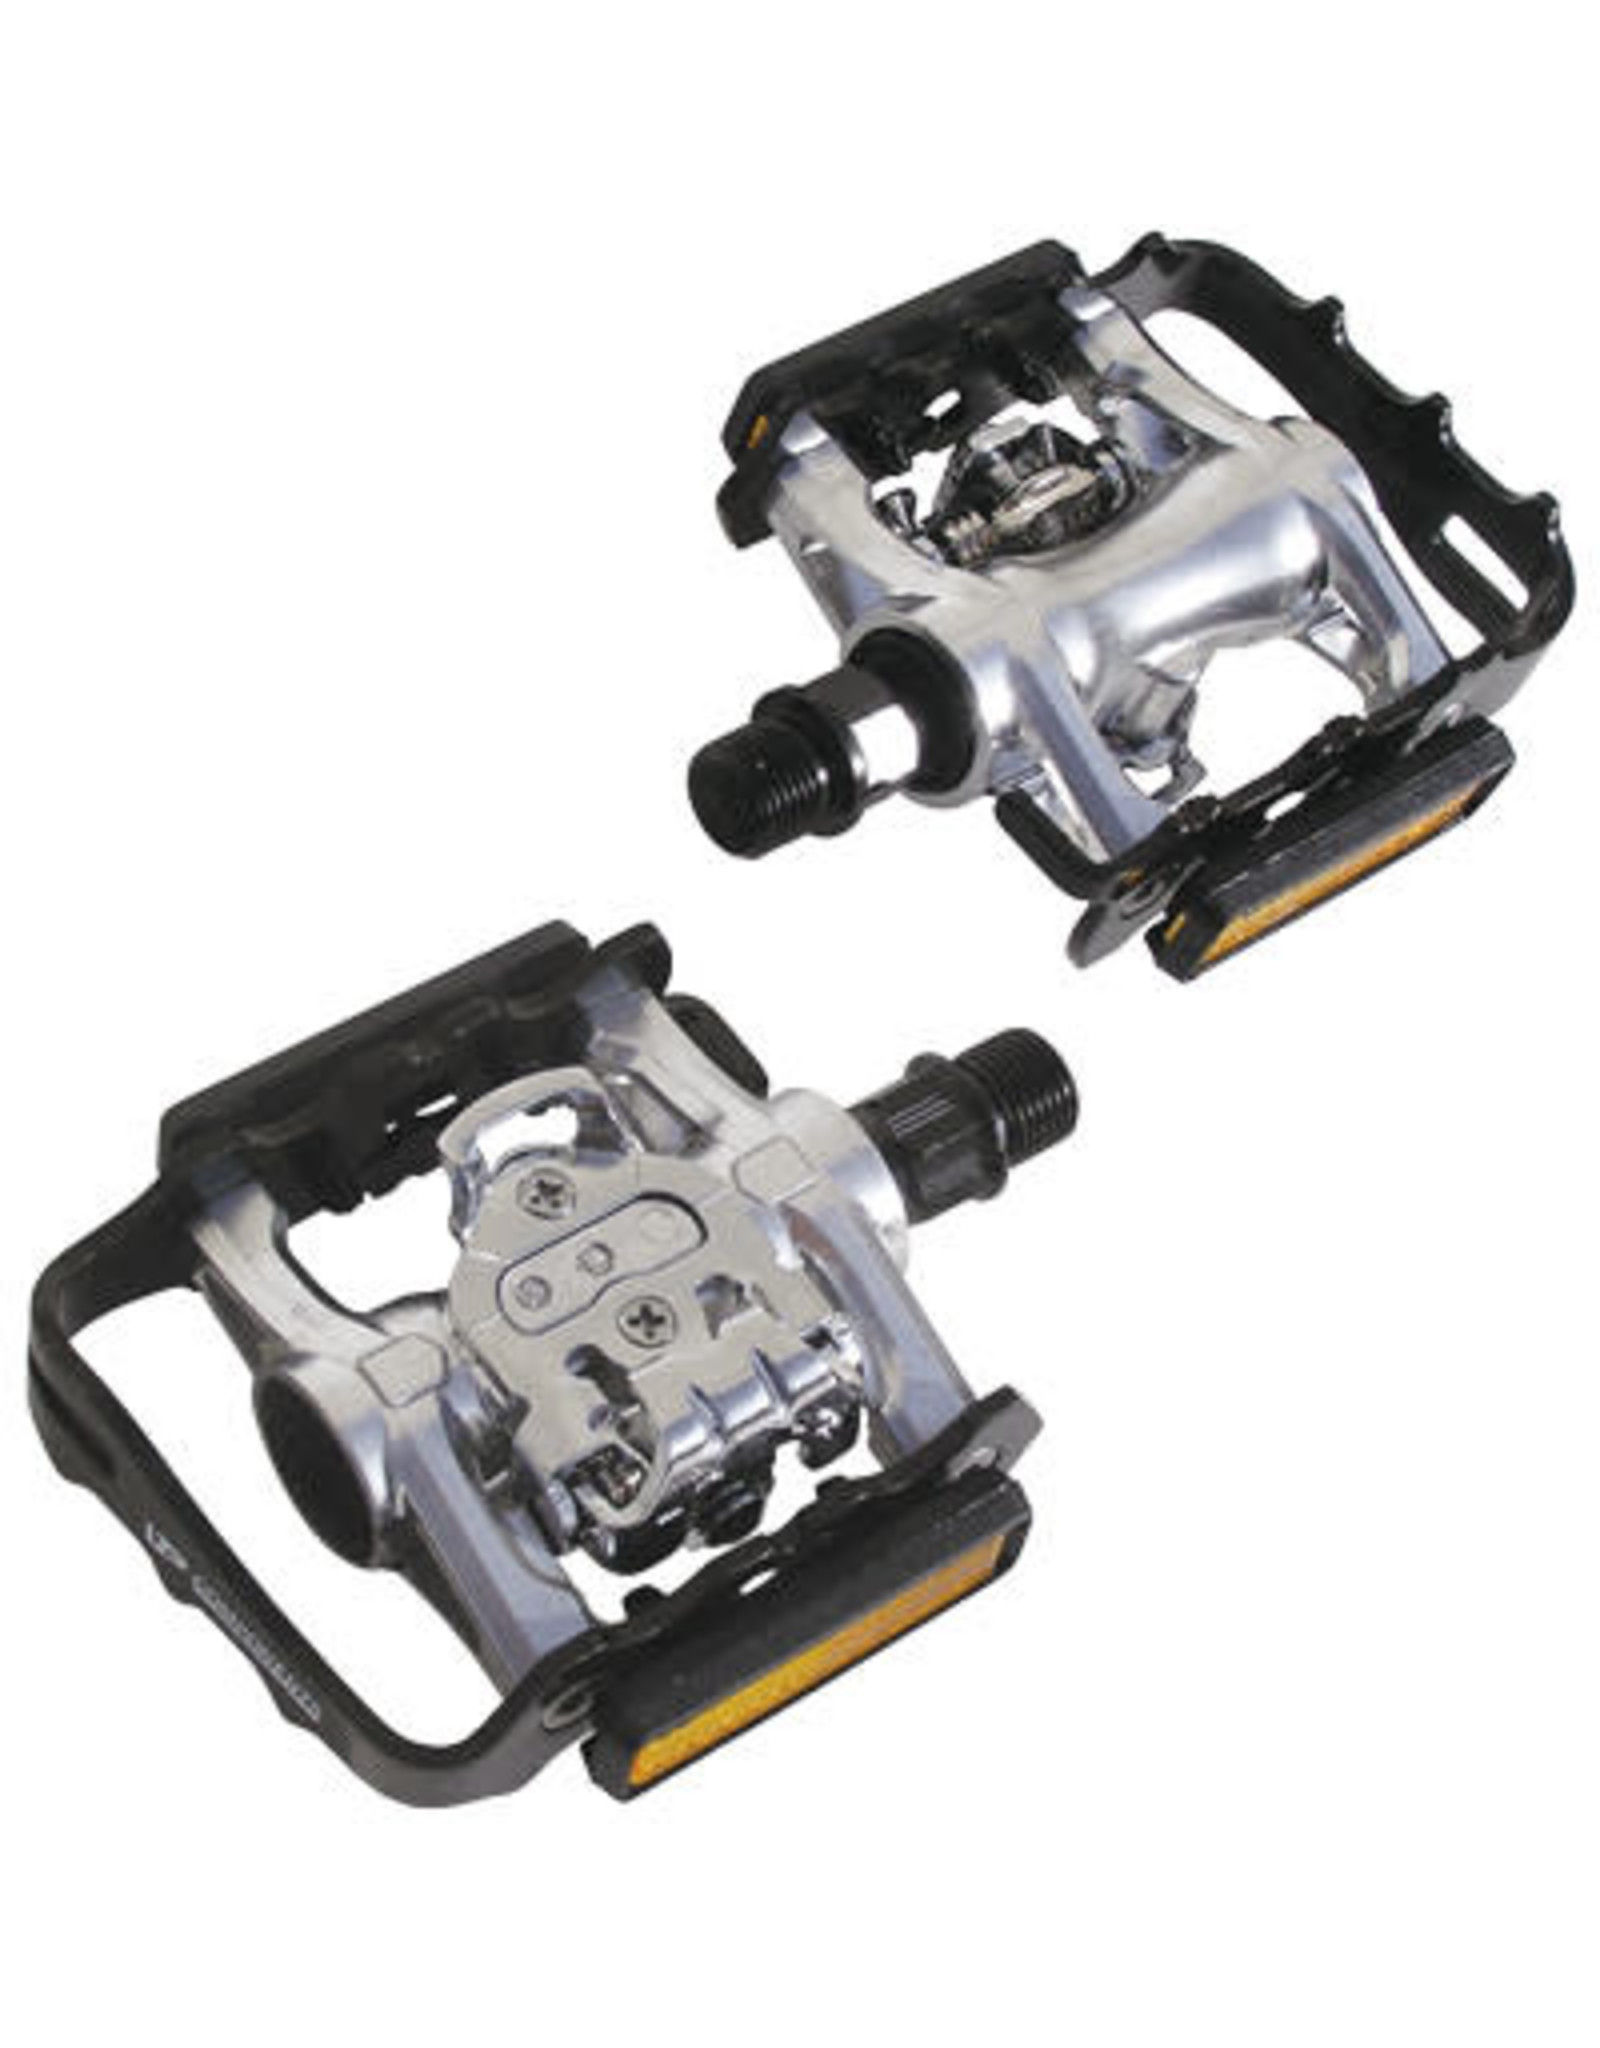 ULTRACYCLE PEDALS ULTRACYCLE,MULTI-PURPOSE,